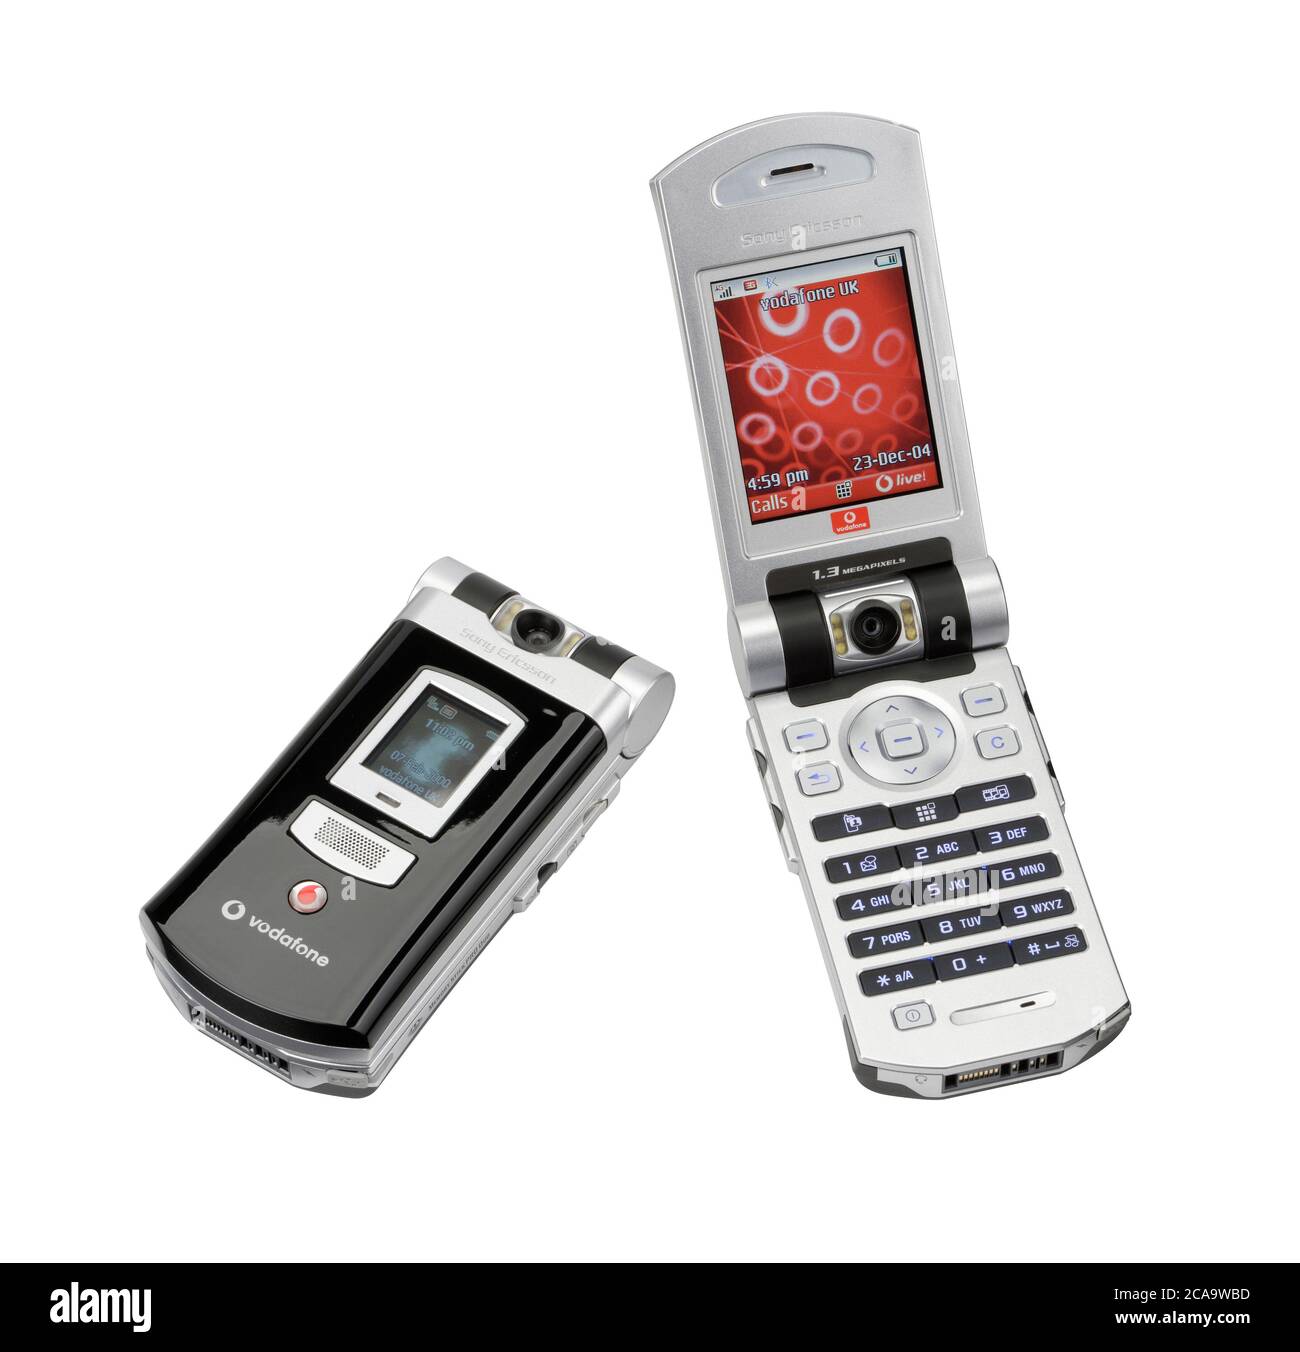 A Sony Ericsson mobile phone from year 2004. Vodafone tied contract telephone that has a flip open mechanism. Stock Photo